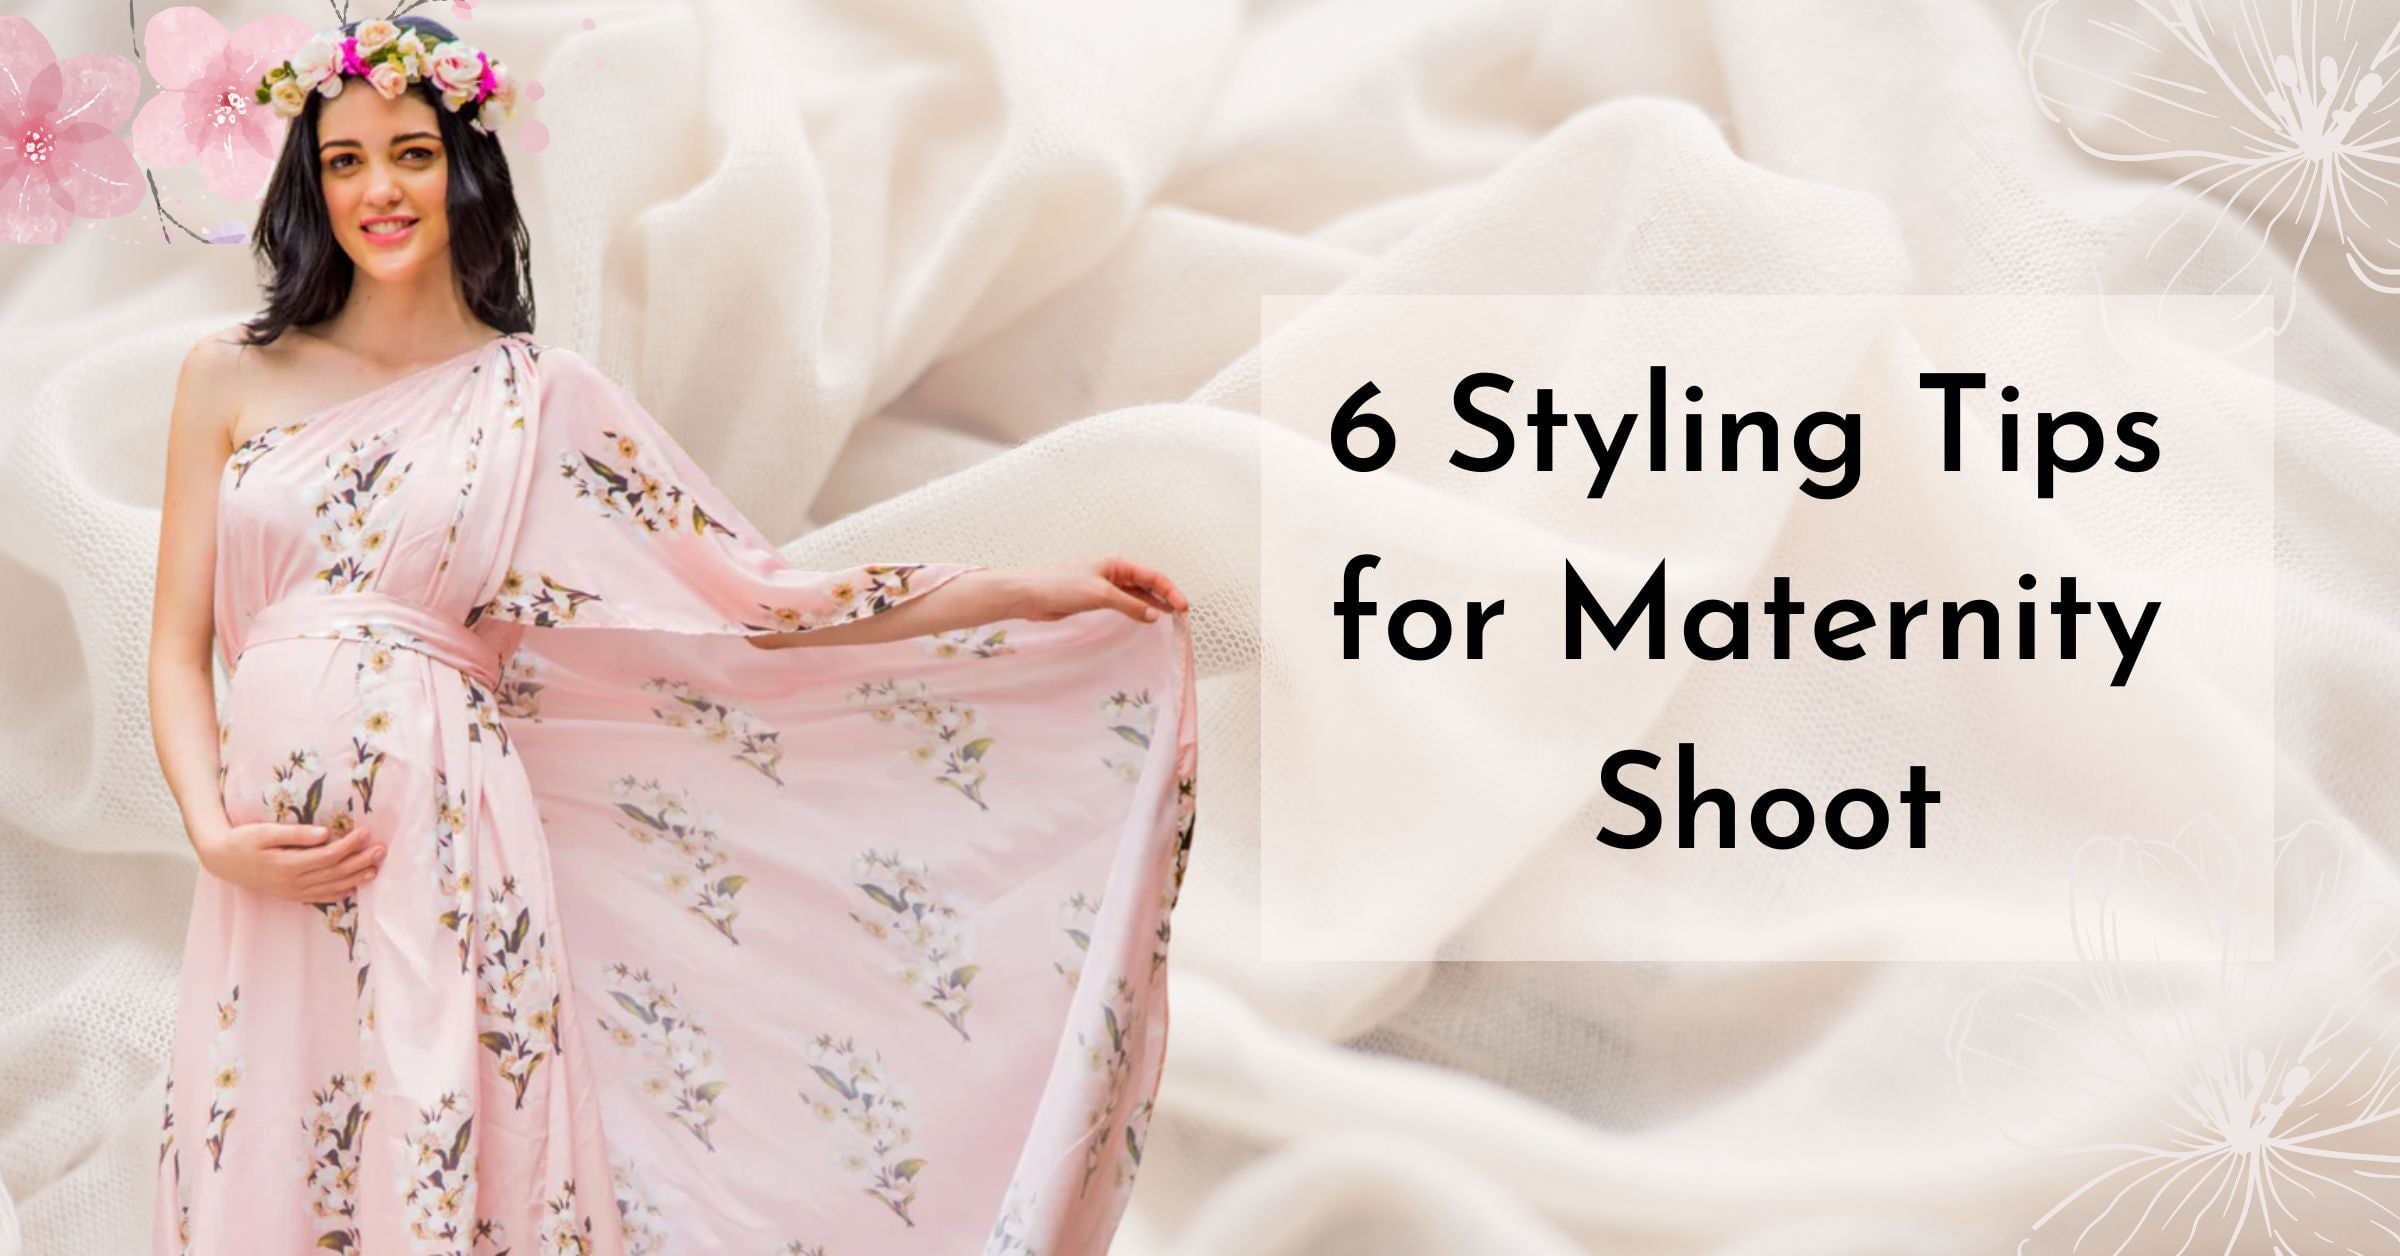 6 Styling Tips for Maternity Shoot